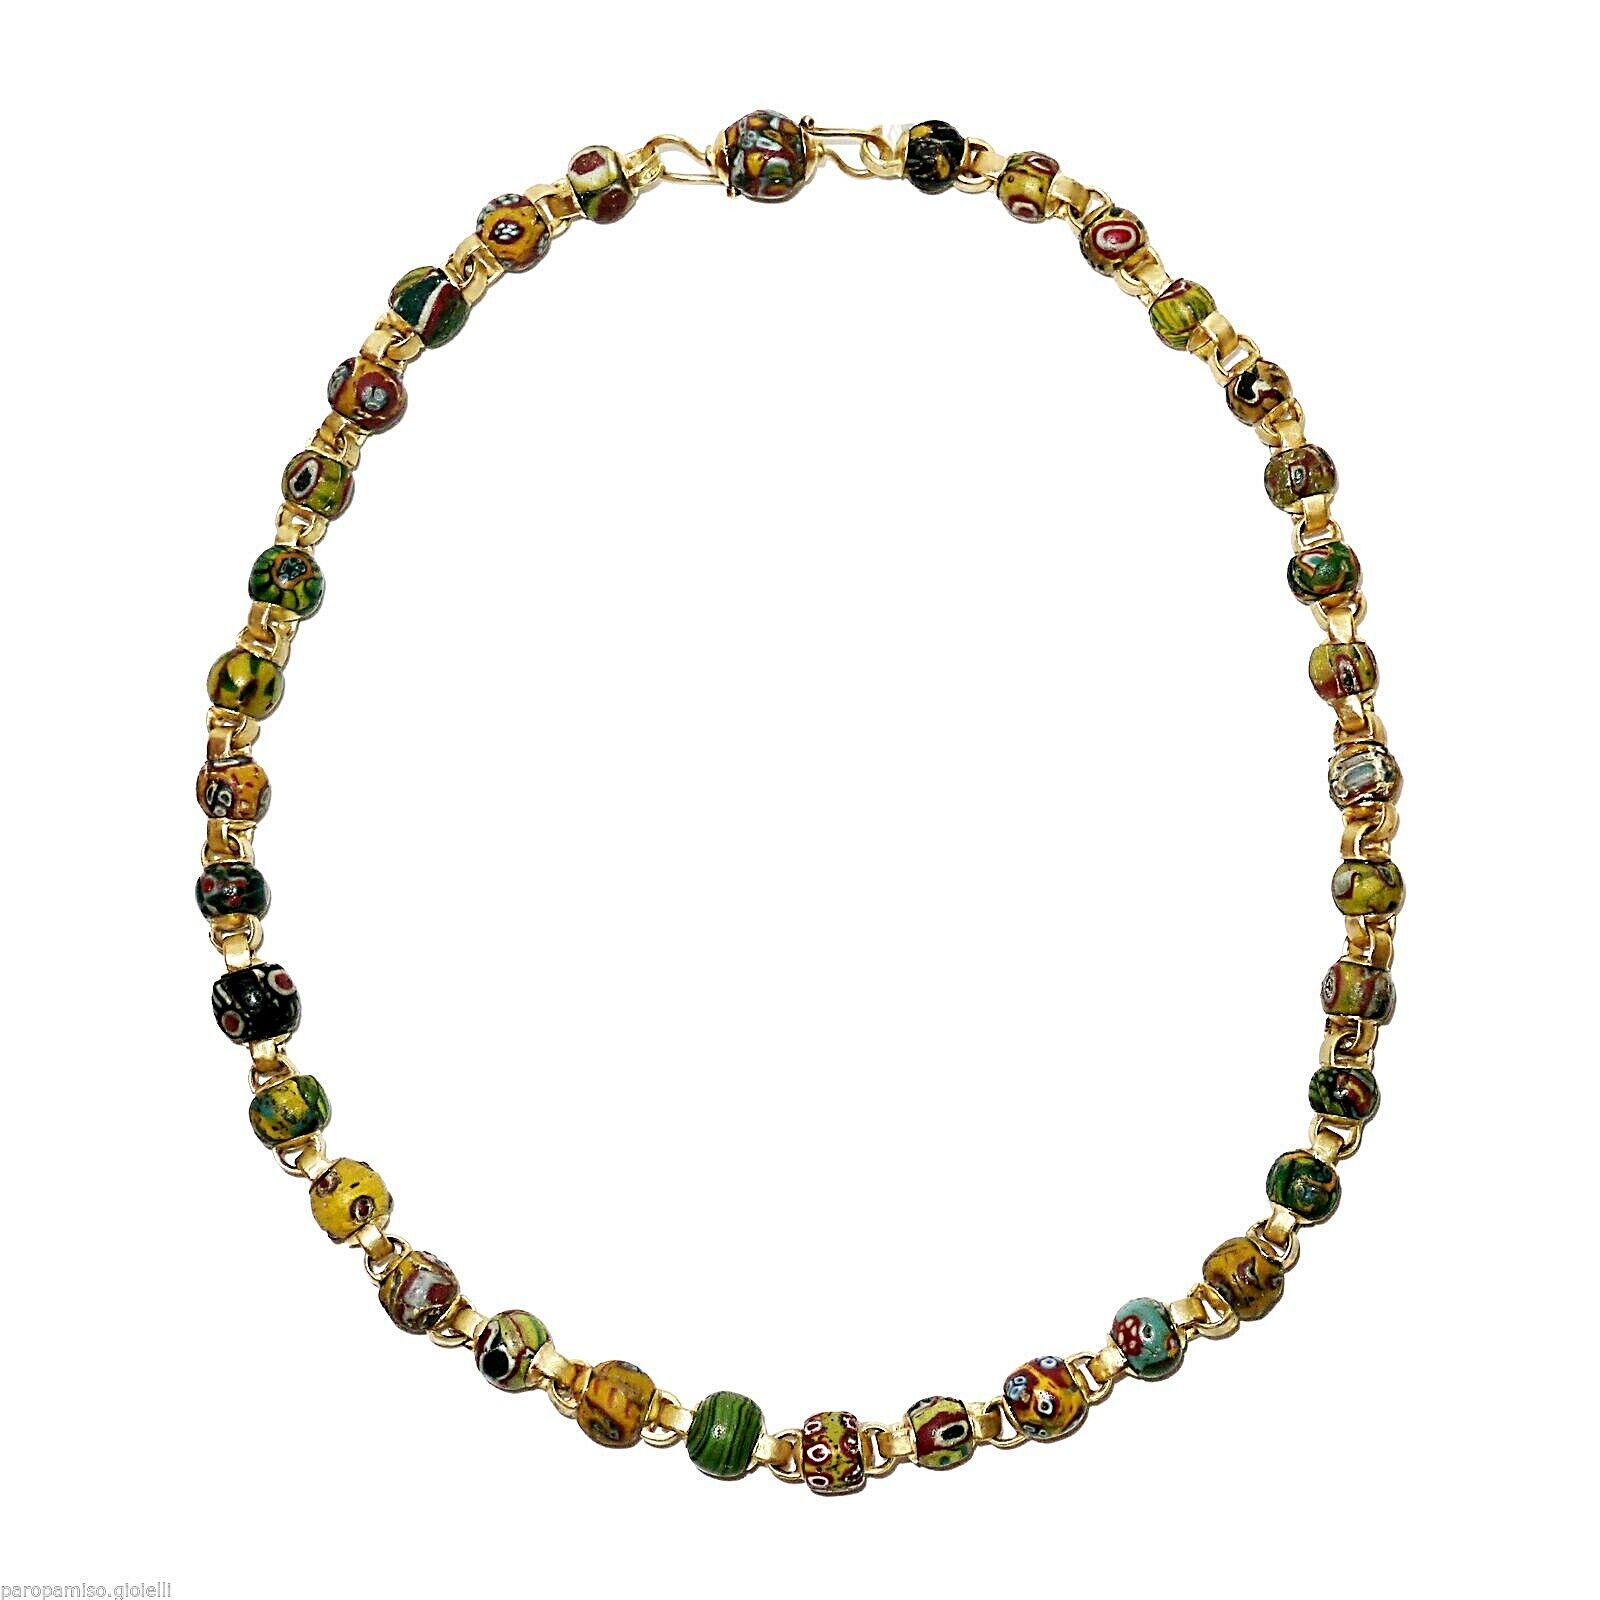 (0734) Necklace of Early Islamic Glass Beads Mount in 18k Gold  